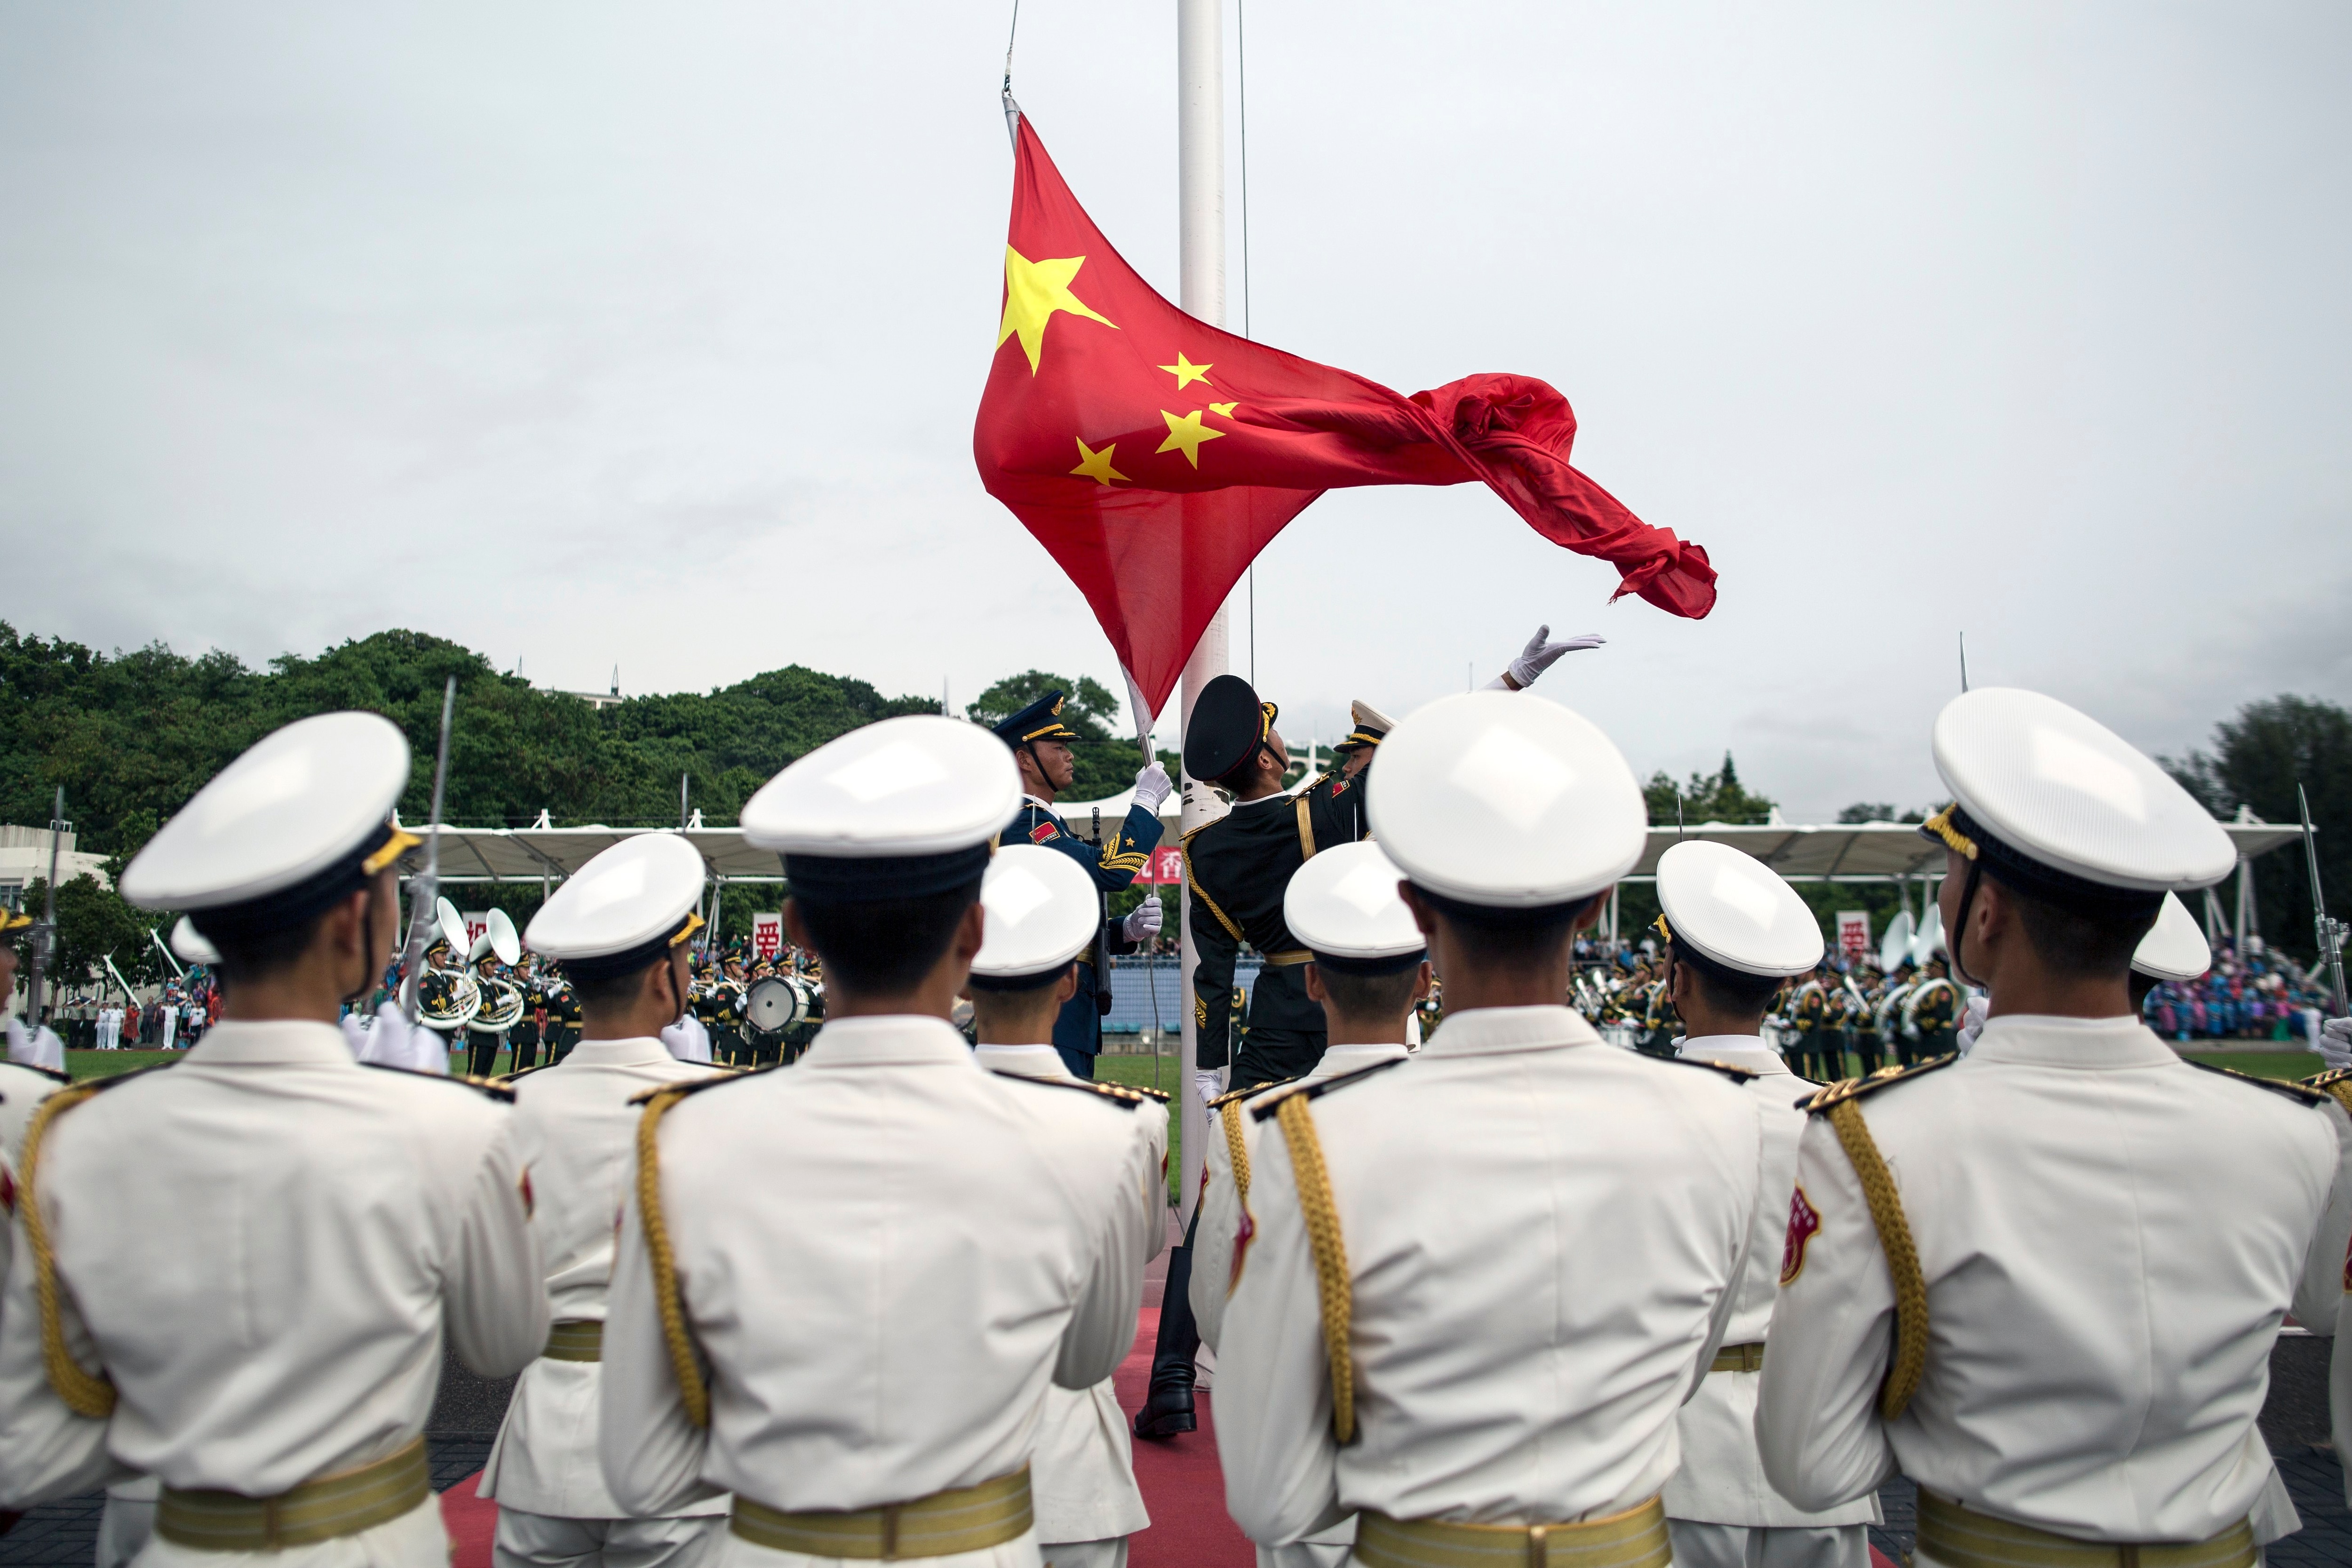 People's Liberation Army (PLA) soldiers participate in a flag raising ceremony during an open day at the PLA navy base in Hong Kong.